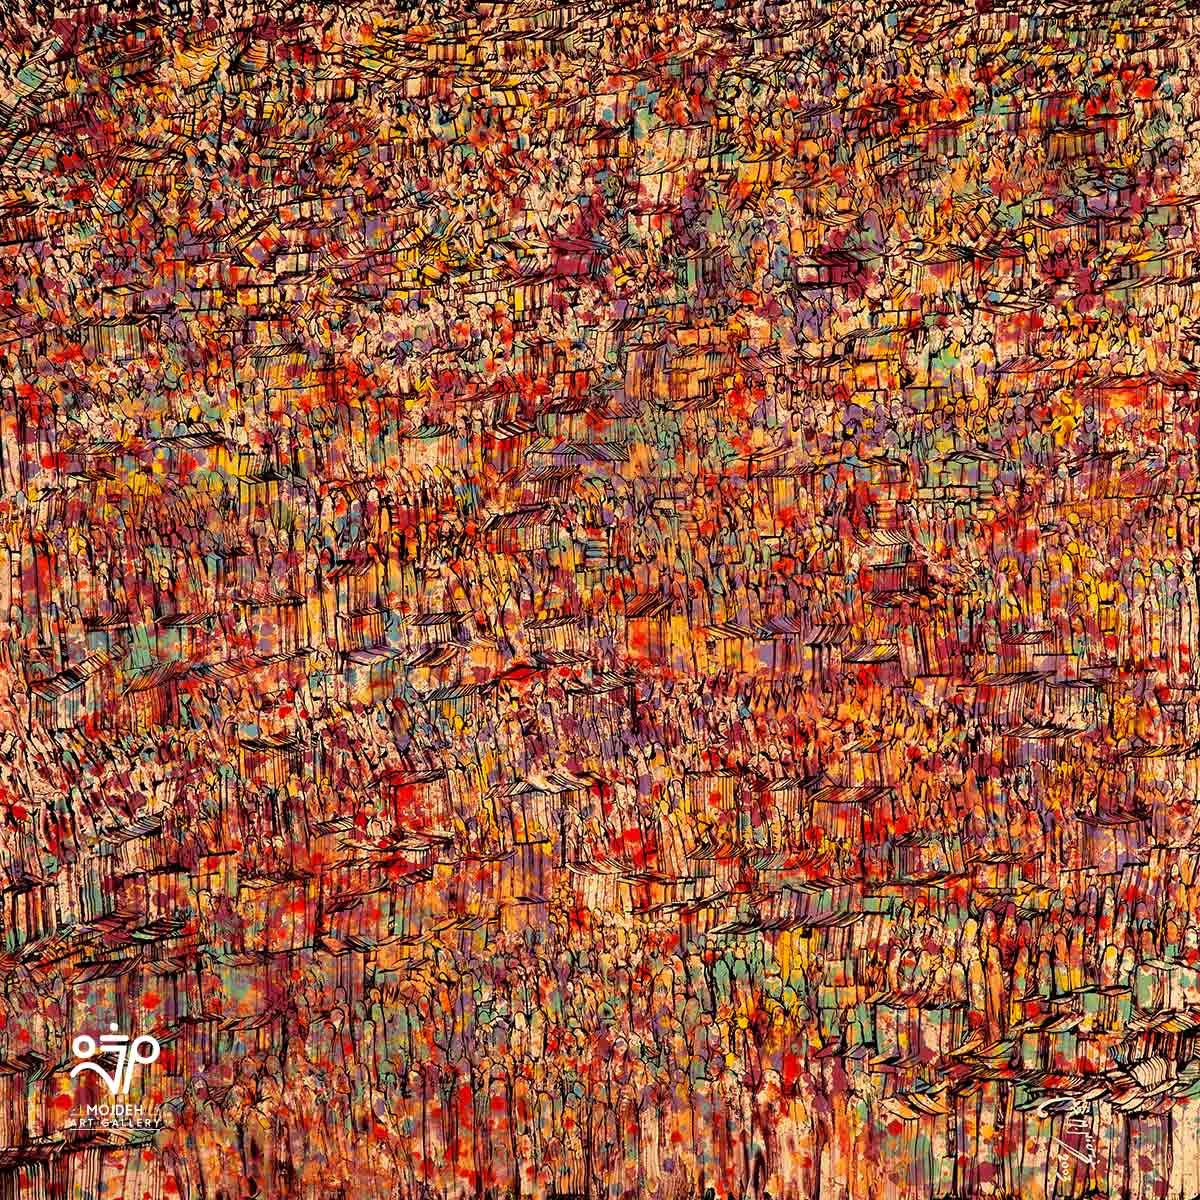 Manouchehr Niazi - 150 × 150 cm - Oil on canvas - 2003 - Private Collection